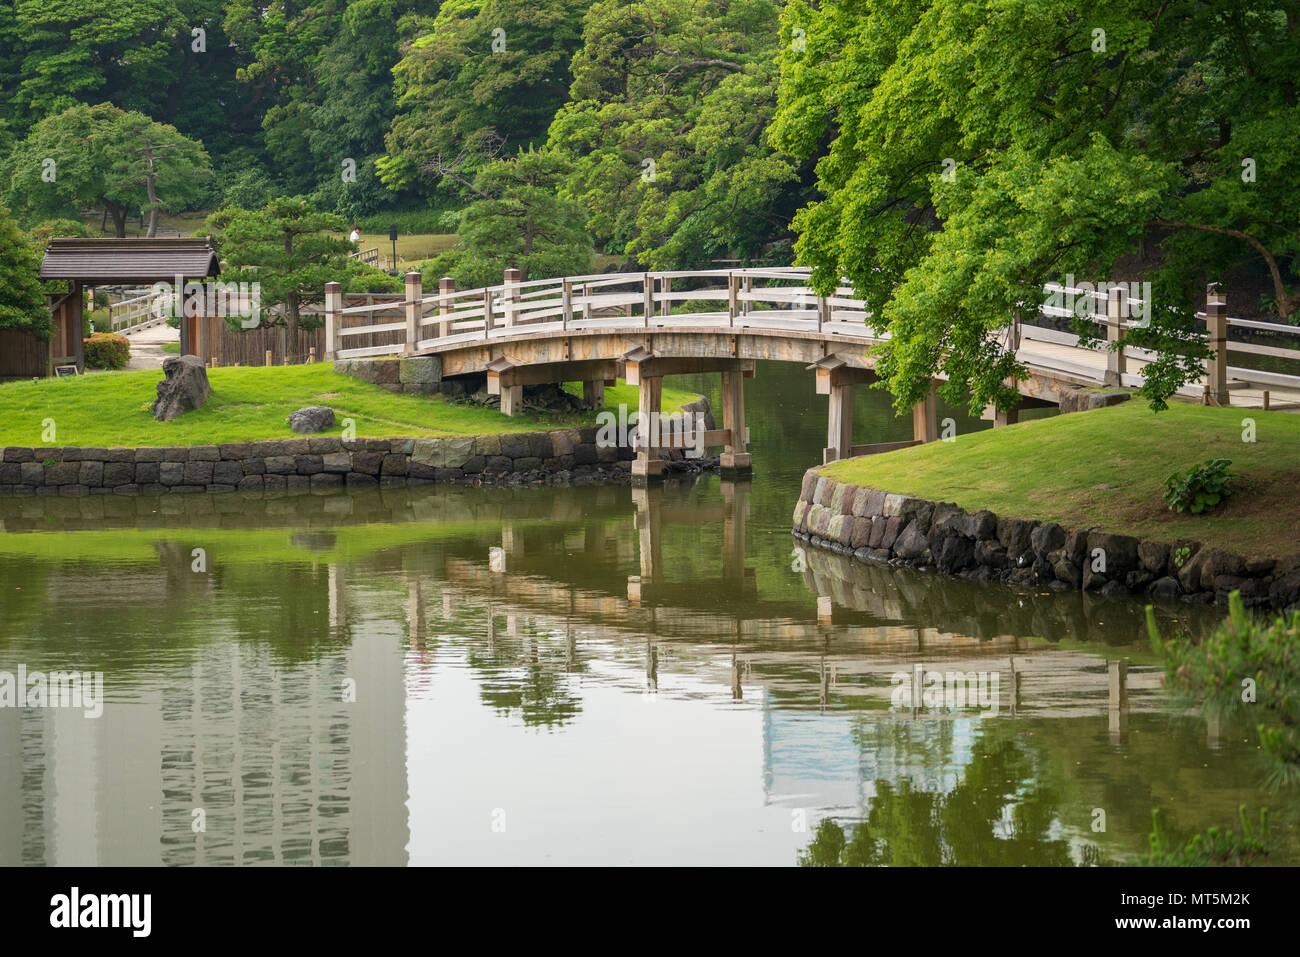 Hamarikyu Gardens in Tokyo are a popular spot for both tourists and locals.  This park has ponds, bridges and a Japanese tea house in its grounds. Stock Photo